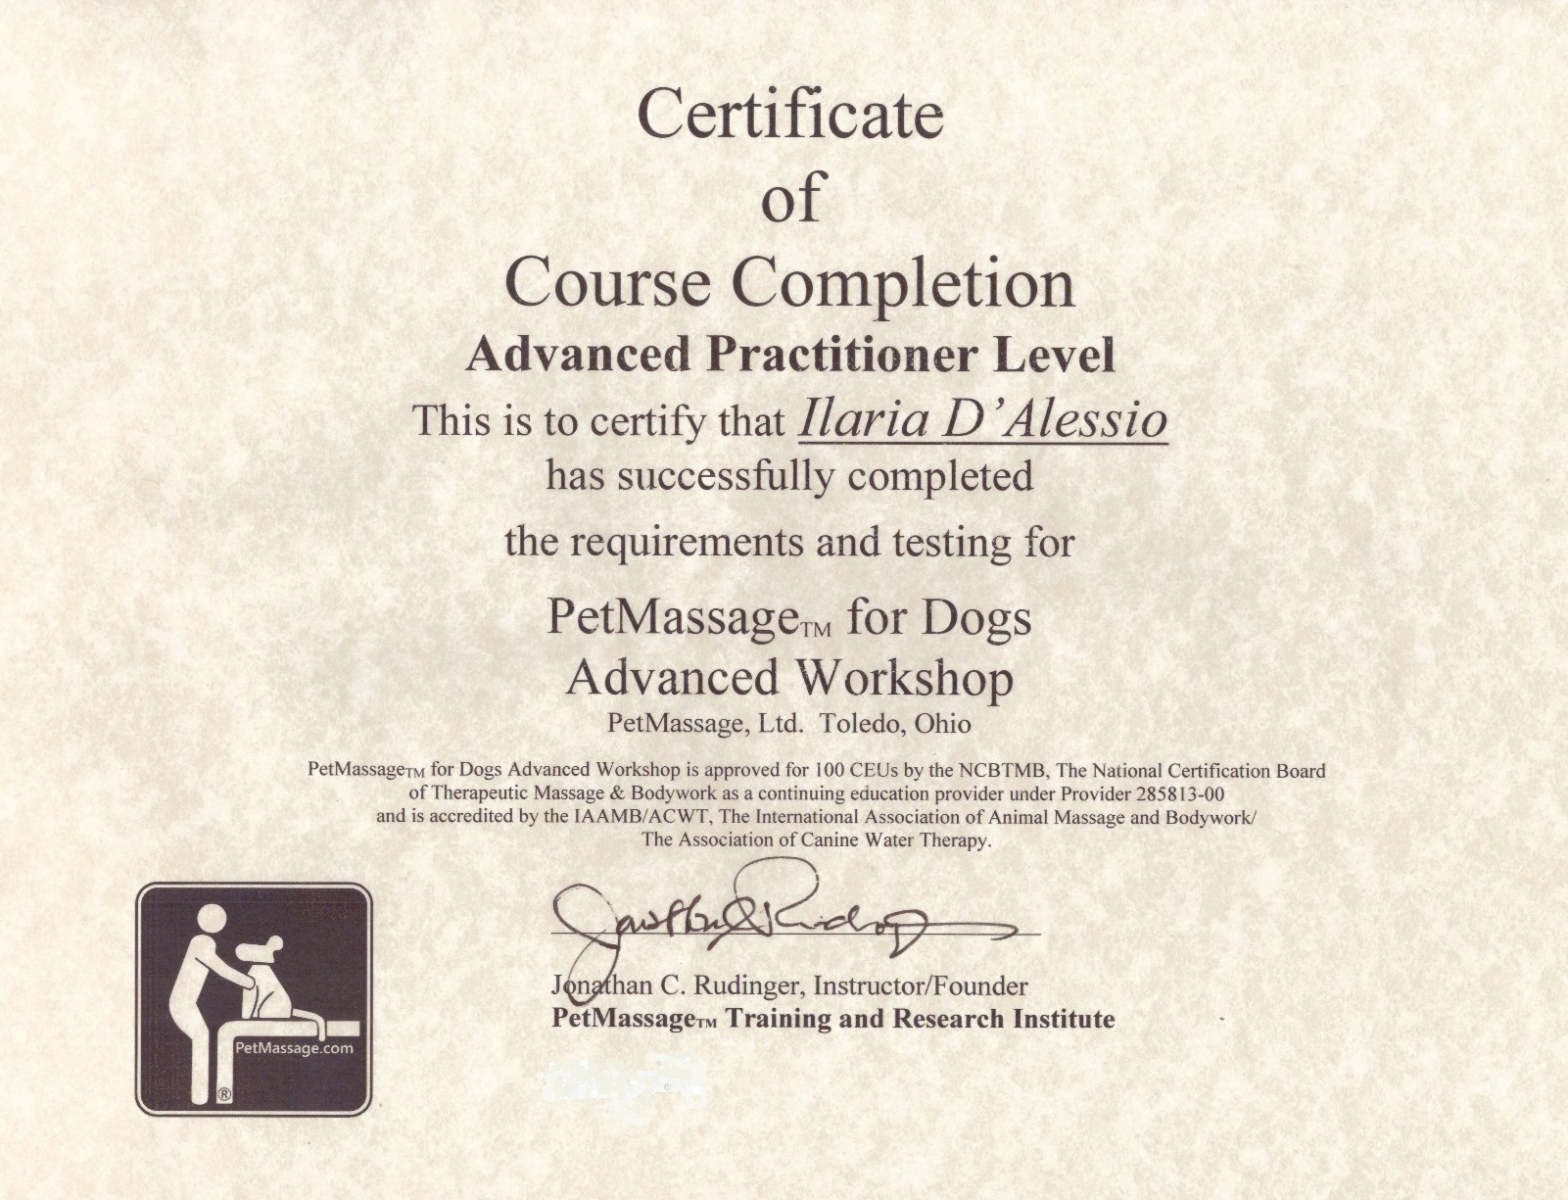 PETMASSAGE ADVANCED PRACTITIONER LEVEL CERTIFICATE